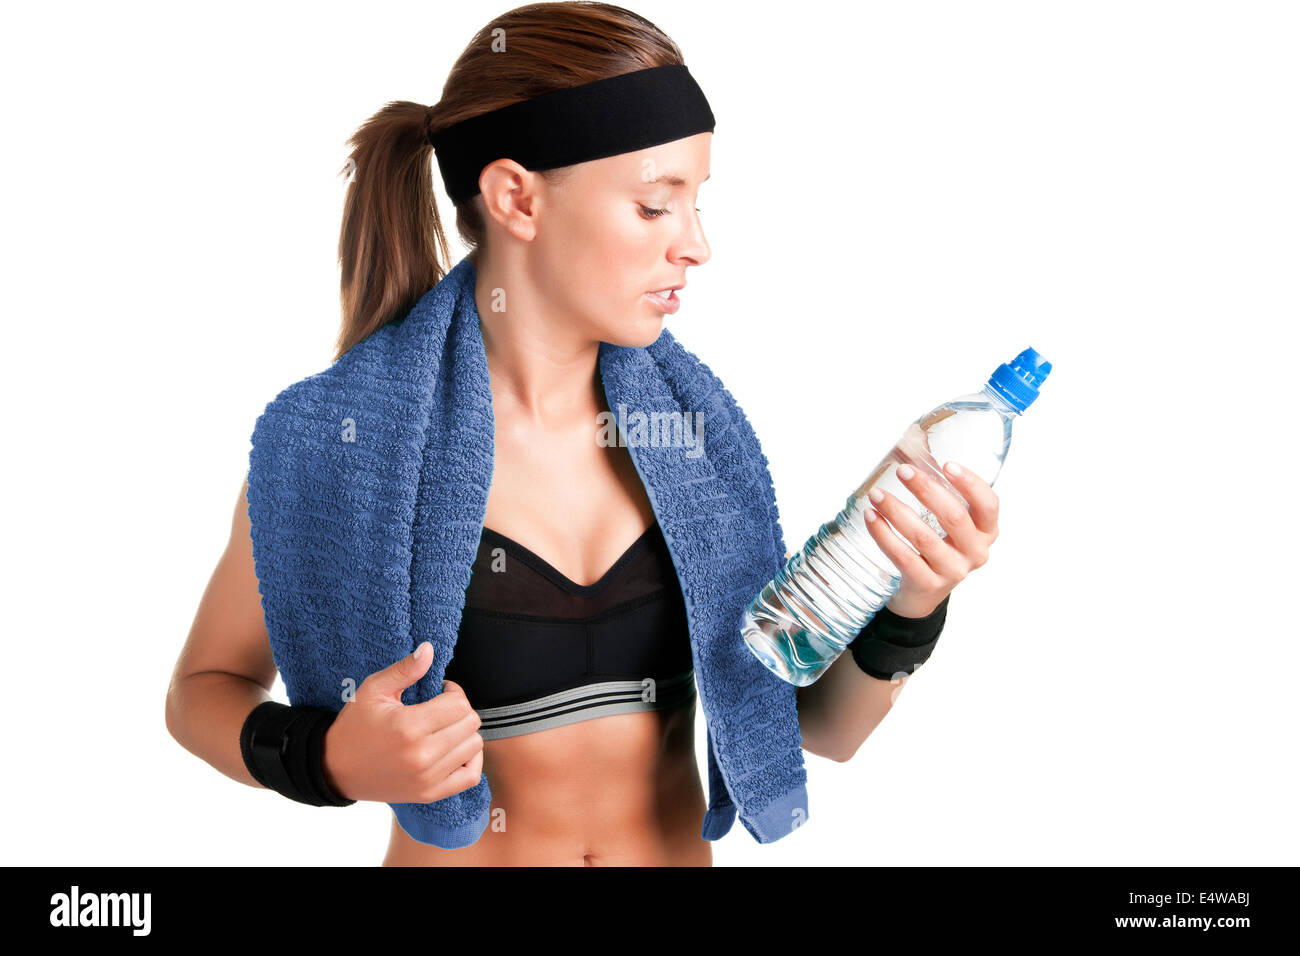 Woman Looking at a Bottle of Water Stock Photo